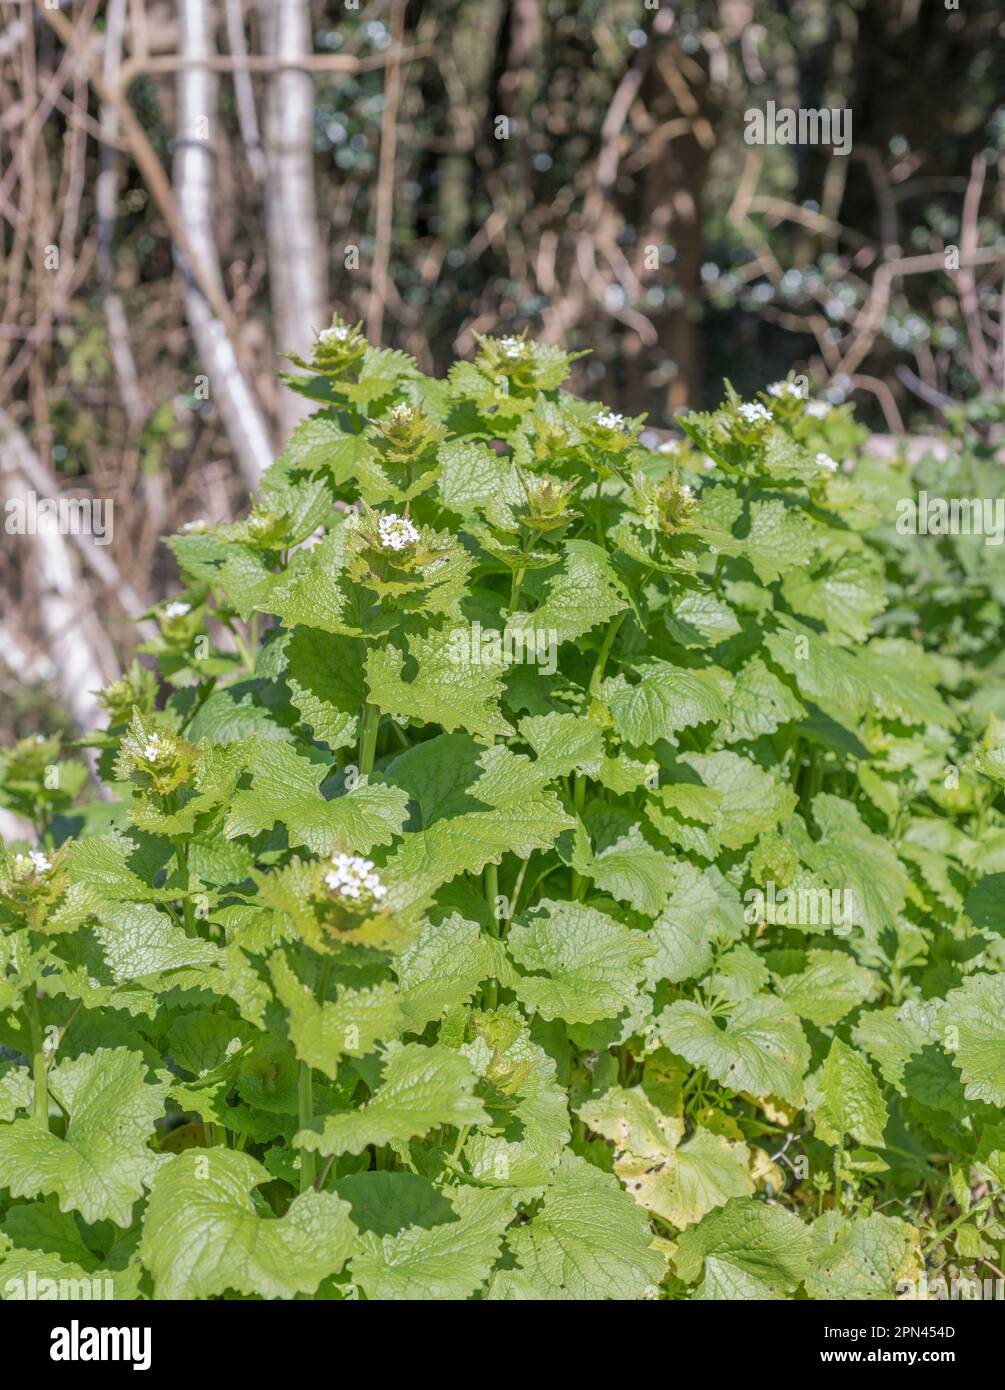 White flowers of Hedge Garlic, Jack by the Hedge / Alliaria petiolata growing in sunny springtime hedge. Used as medicinal plant and for food. Stock Photo